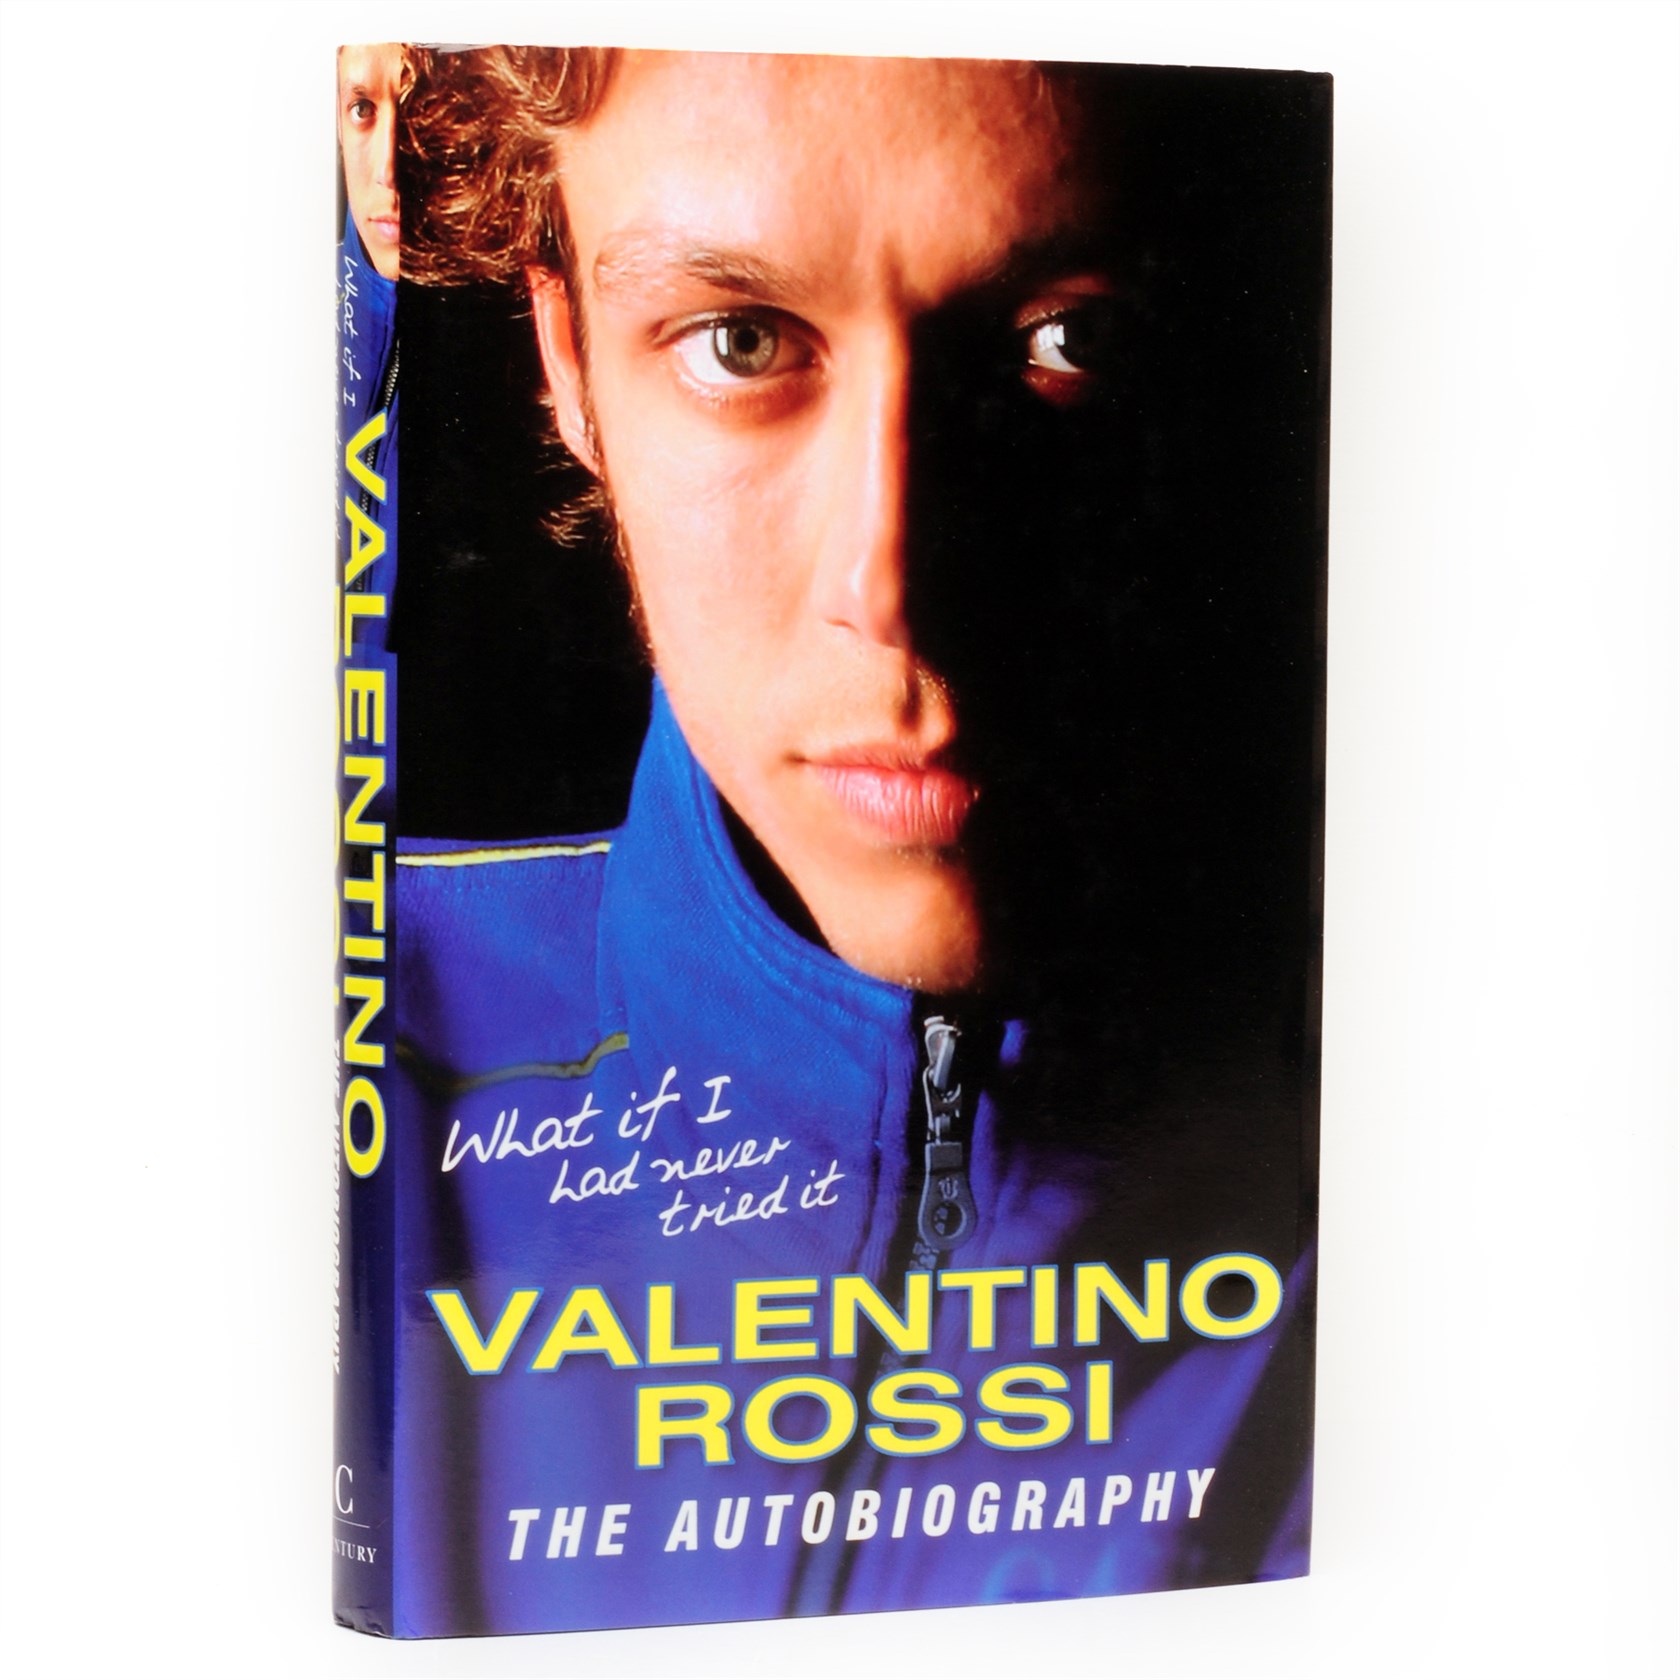 Valentino Rossi What If I Had Never Tried It The Autobiography book